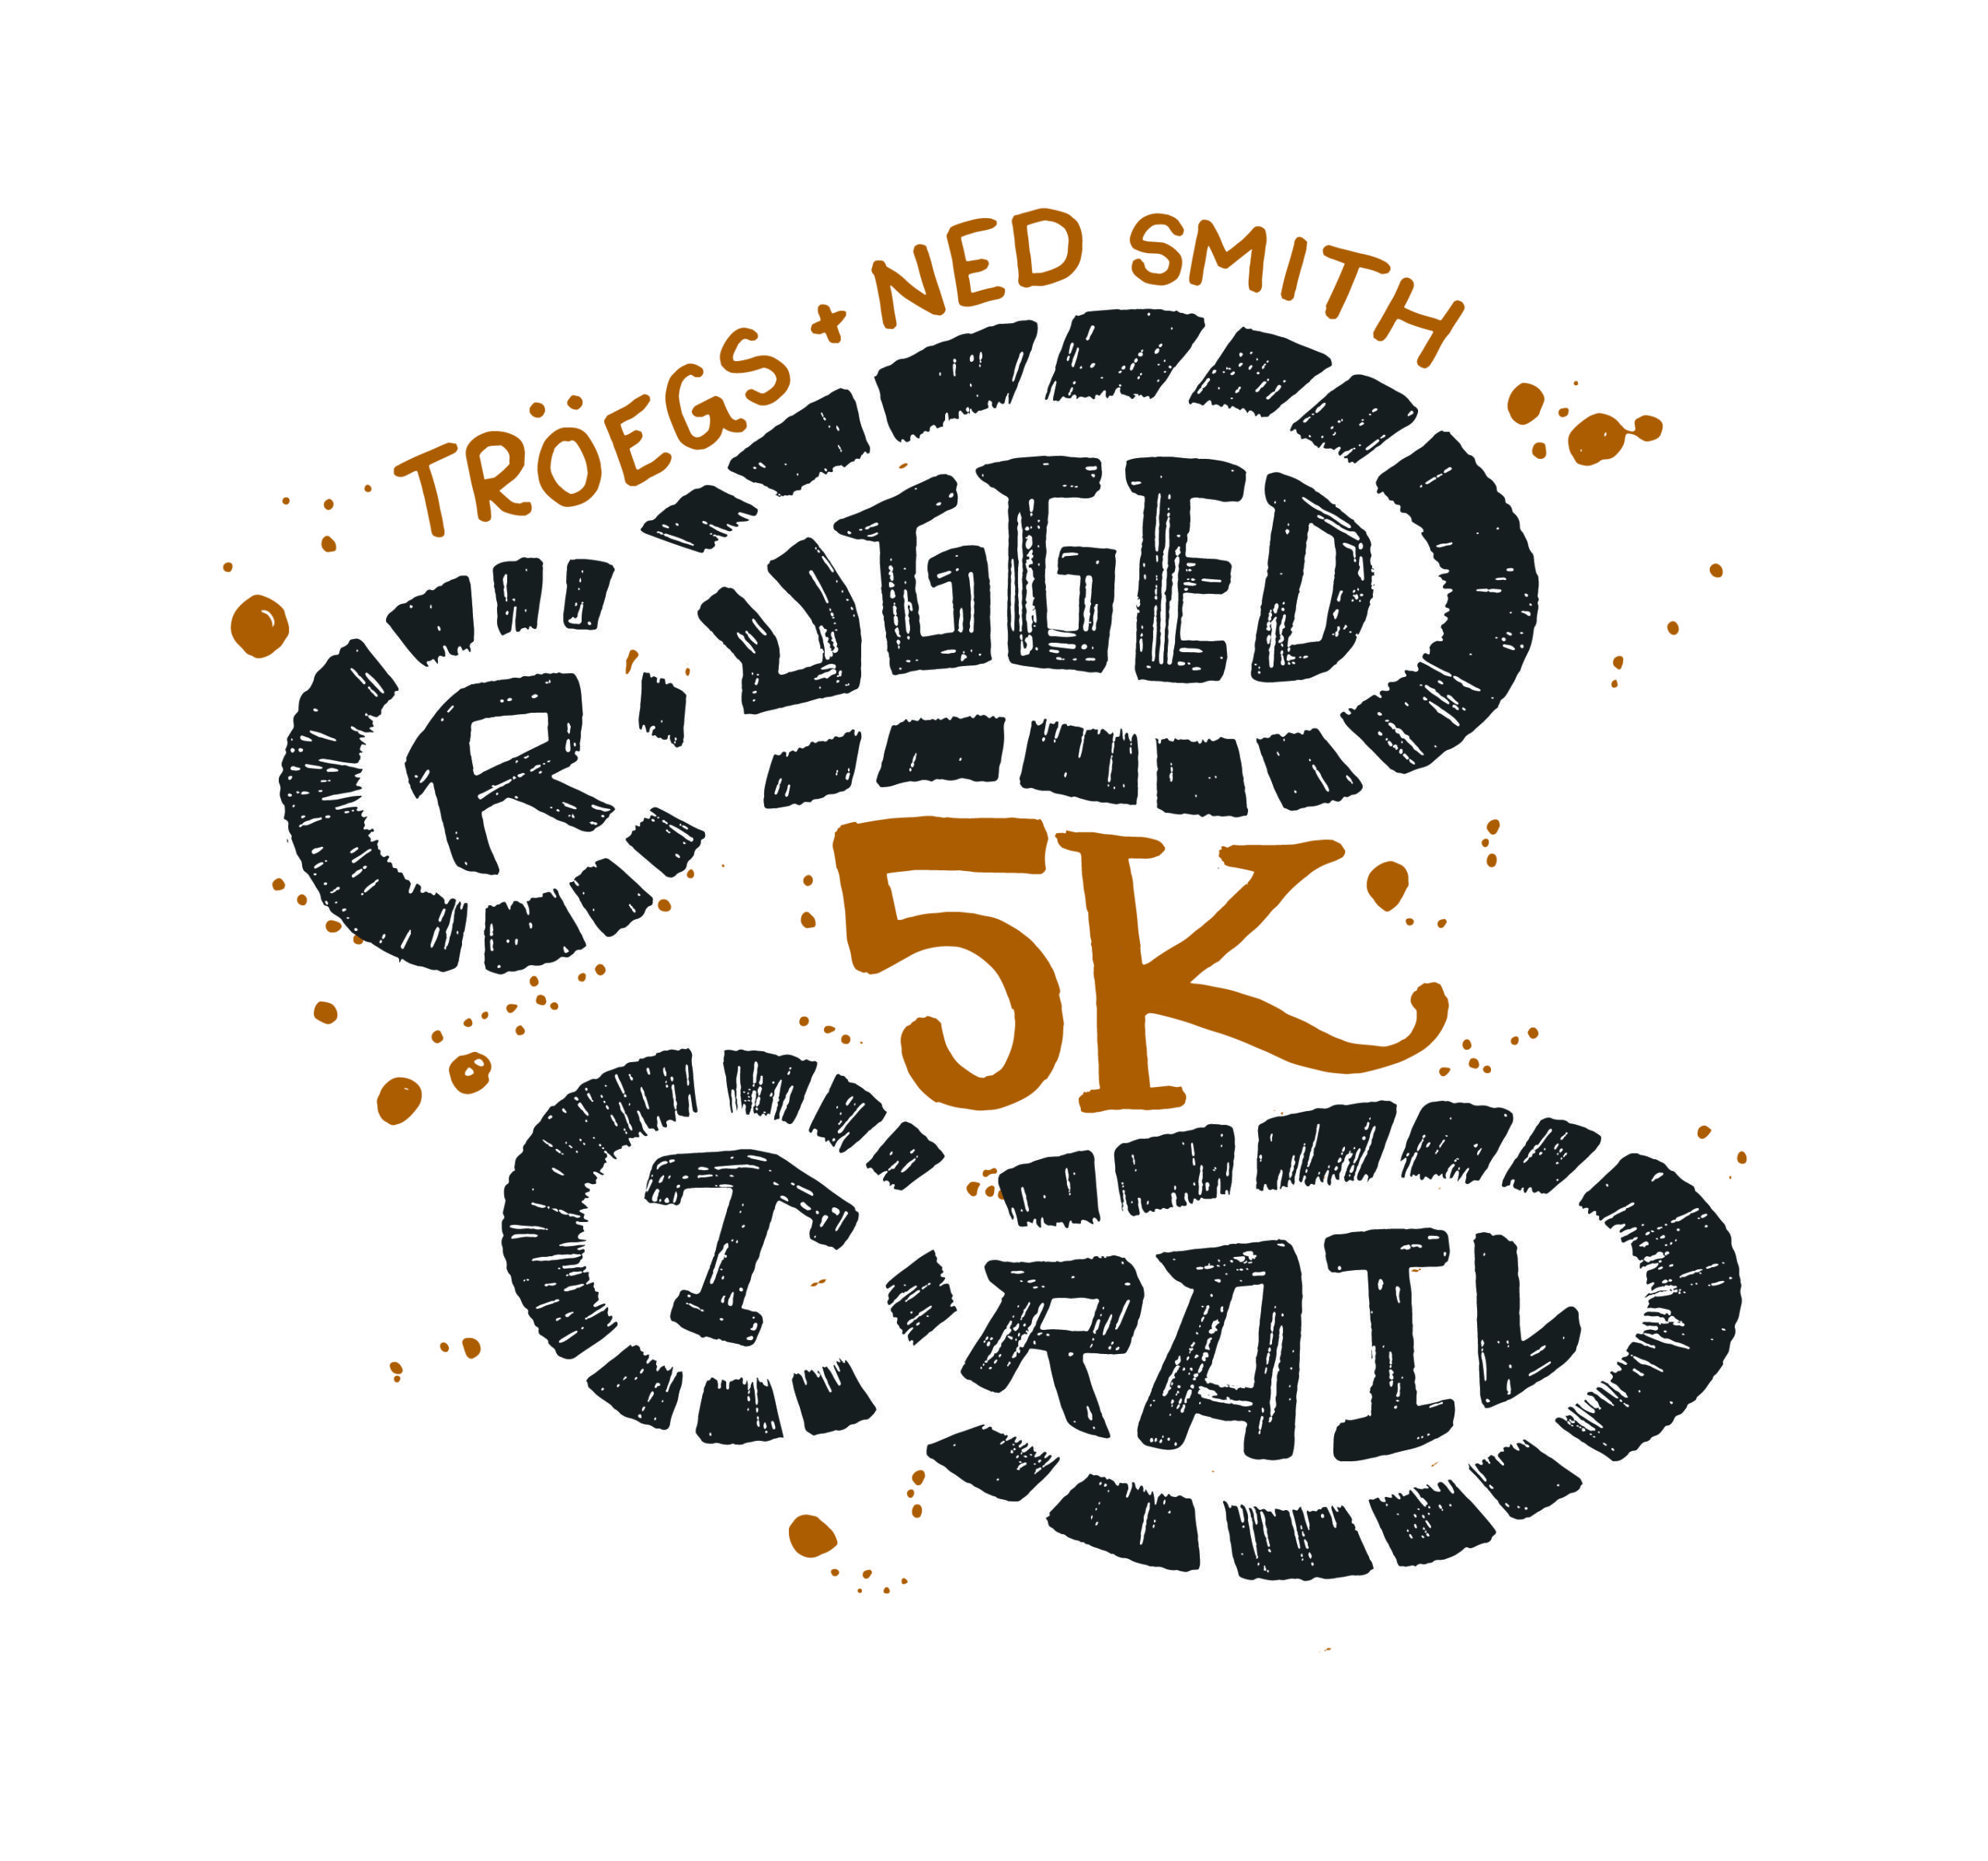 Rugged Trail 5K Run for Conservation @ Ned Smith Center